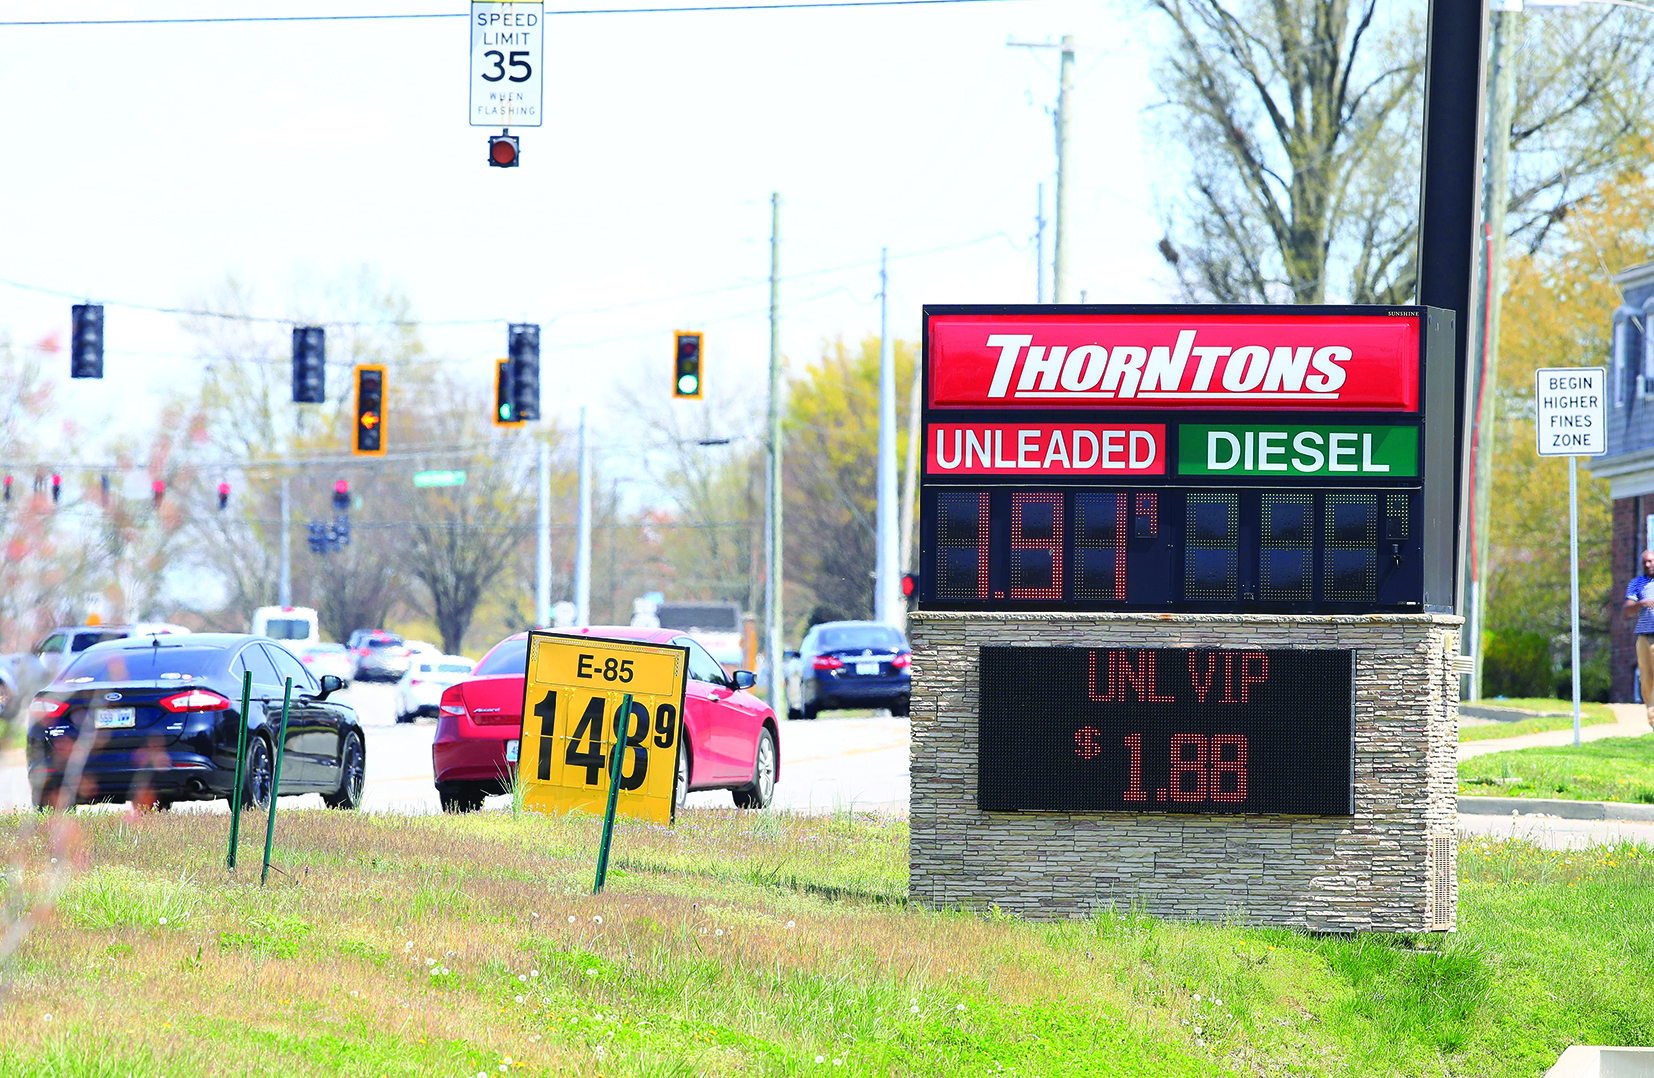 LOUISVILLE, KENTUCKY - APRIL 02: A sign shows the price of gas at a gas station as the national average falls under $2 per gallon amid the coronavirus pandemic on April 02, 2020 in Louisville, Kentucky. According to AAA, roughly 70% of U.S. gas stations are offering $1.99 or less per gallon, which is the lowest price in four years.   Andy Lyons/Getty Images/AFP